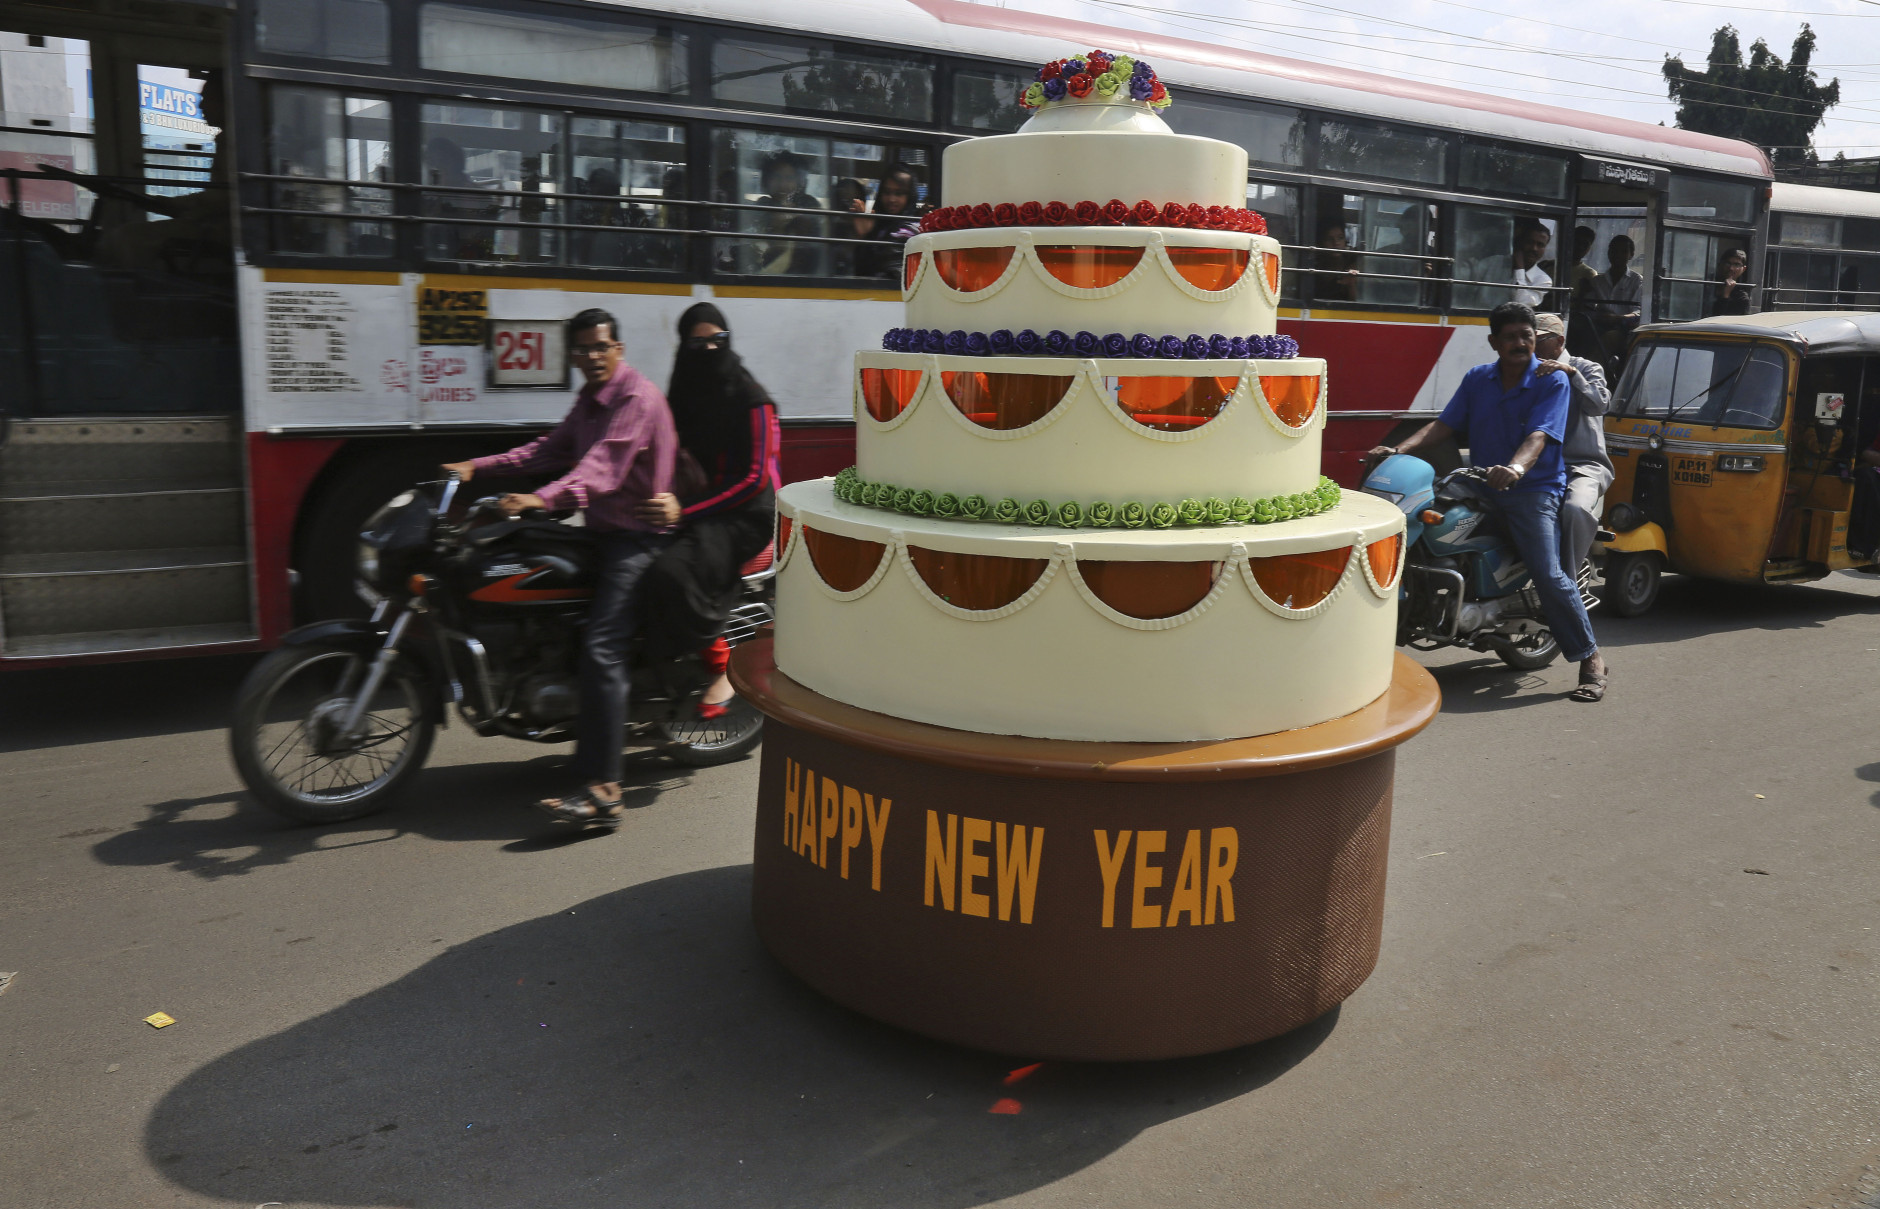 Sudhakar Yadav, the designer of a cake-shaped car, rides it on a street on New Years eve in Hyderabad, India, Wednesday, Dec. 31, 2014. The single seater vehicle is powered by a 100 cc engine from a road sweeping machine and can travel unto 10 kilometers per hour (6 miles per hour). (AP Photo/Mahesh Kumar A.)